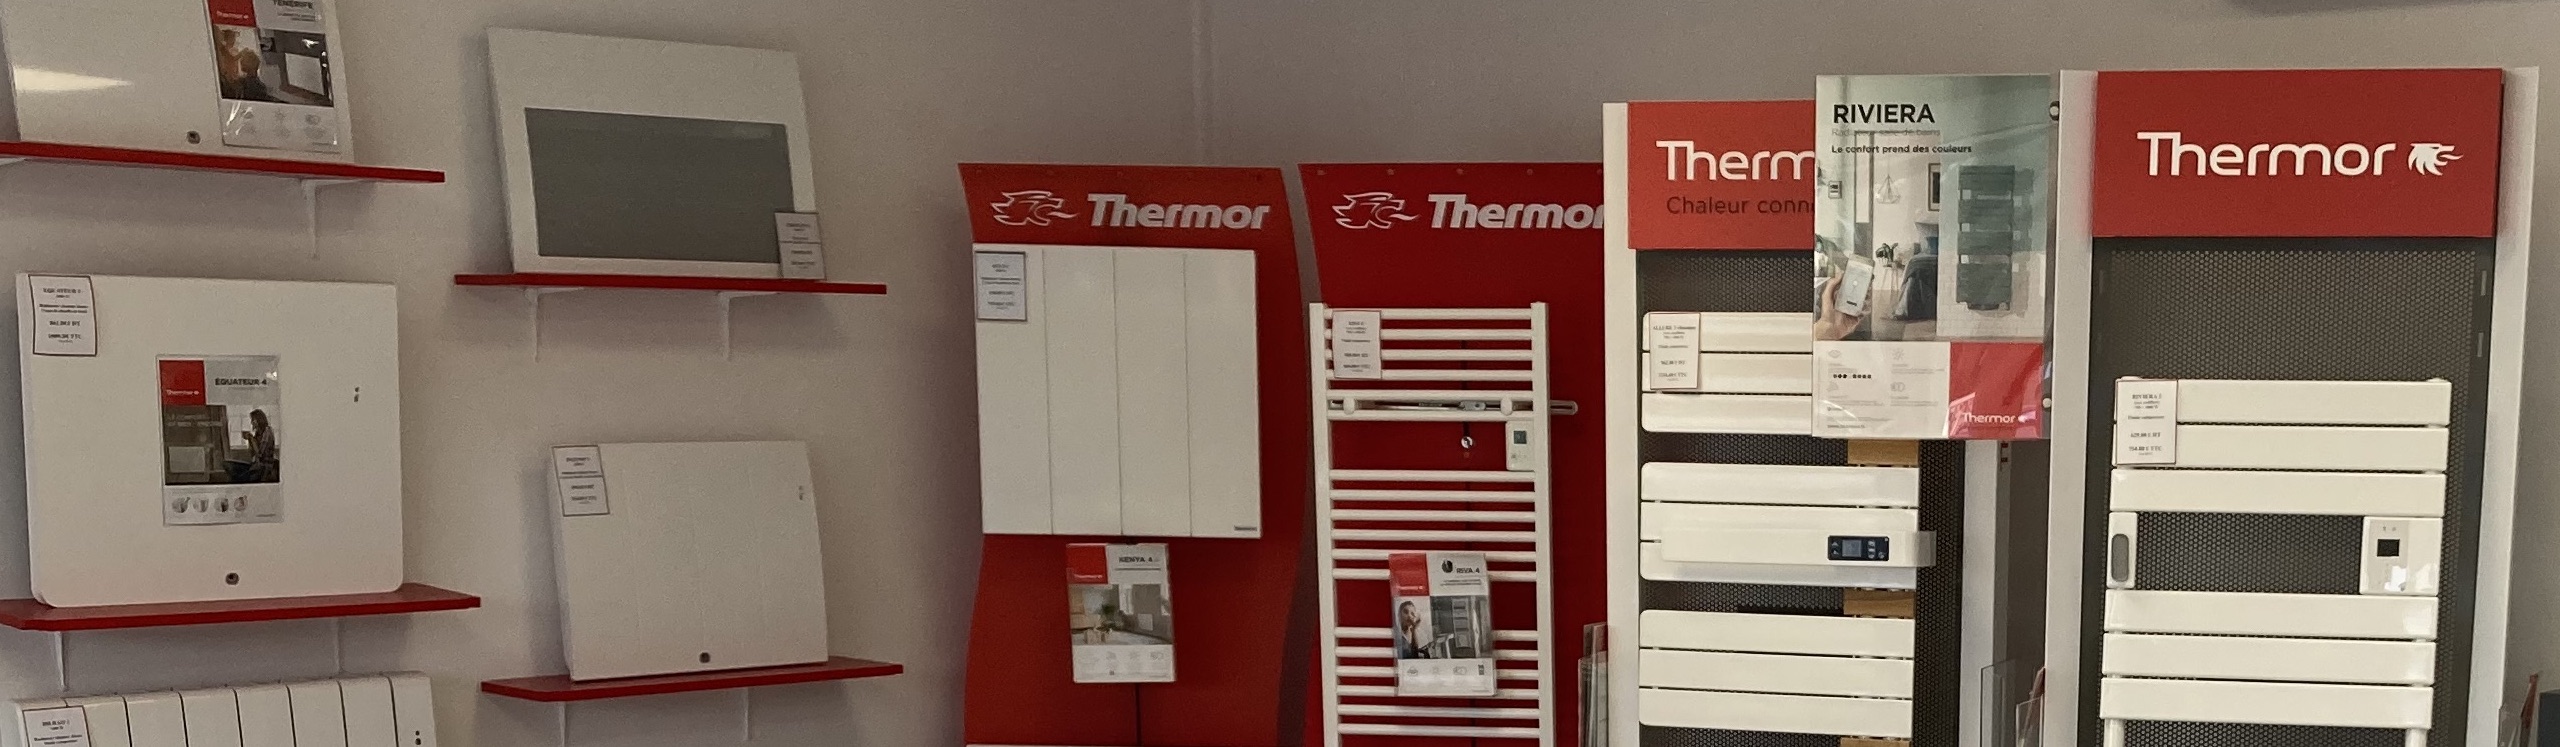 Electro-Thermie-2